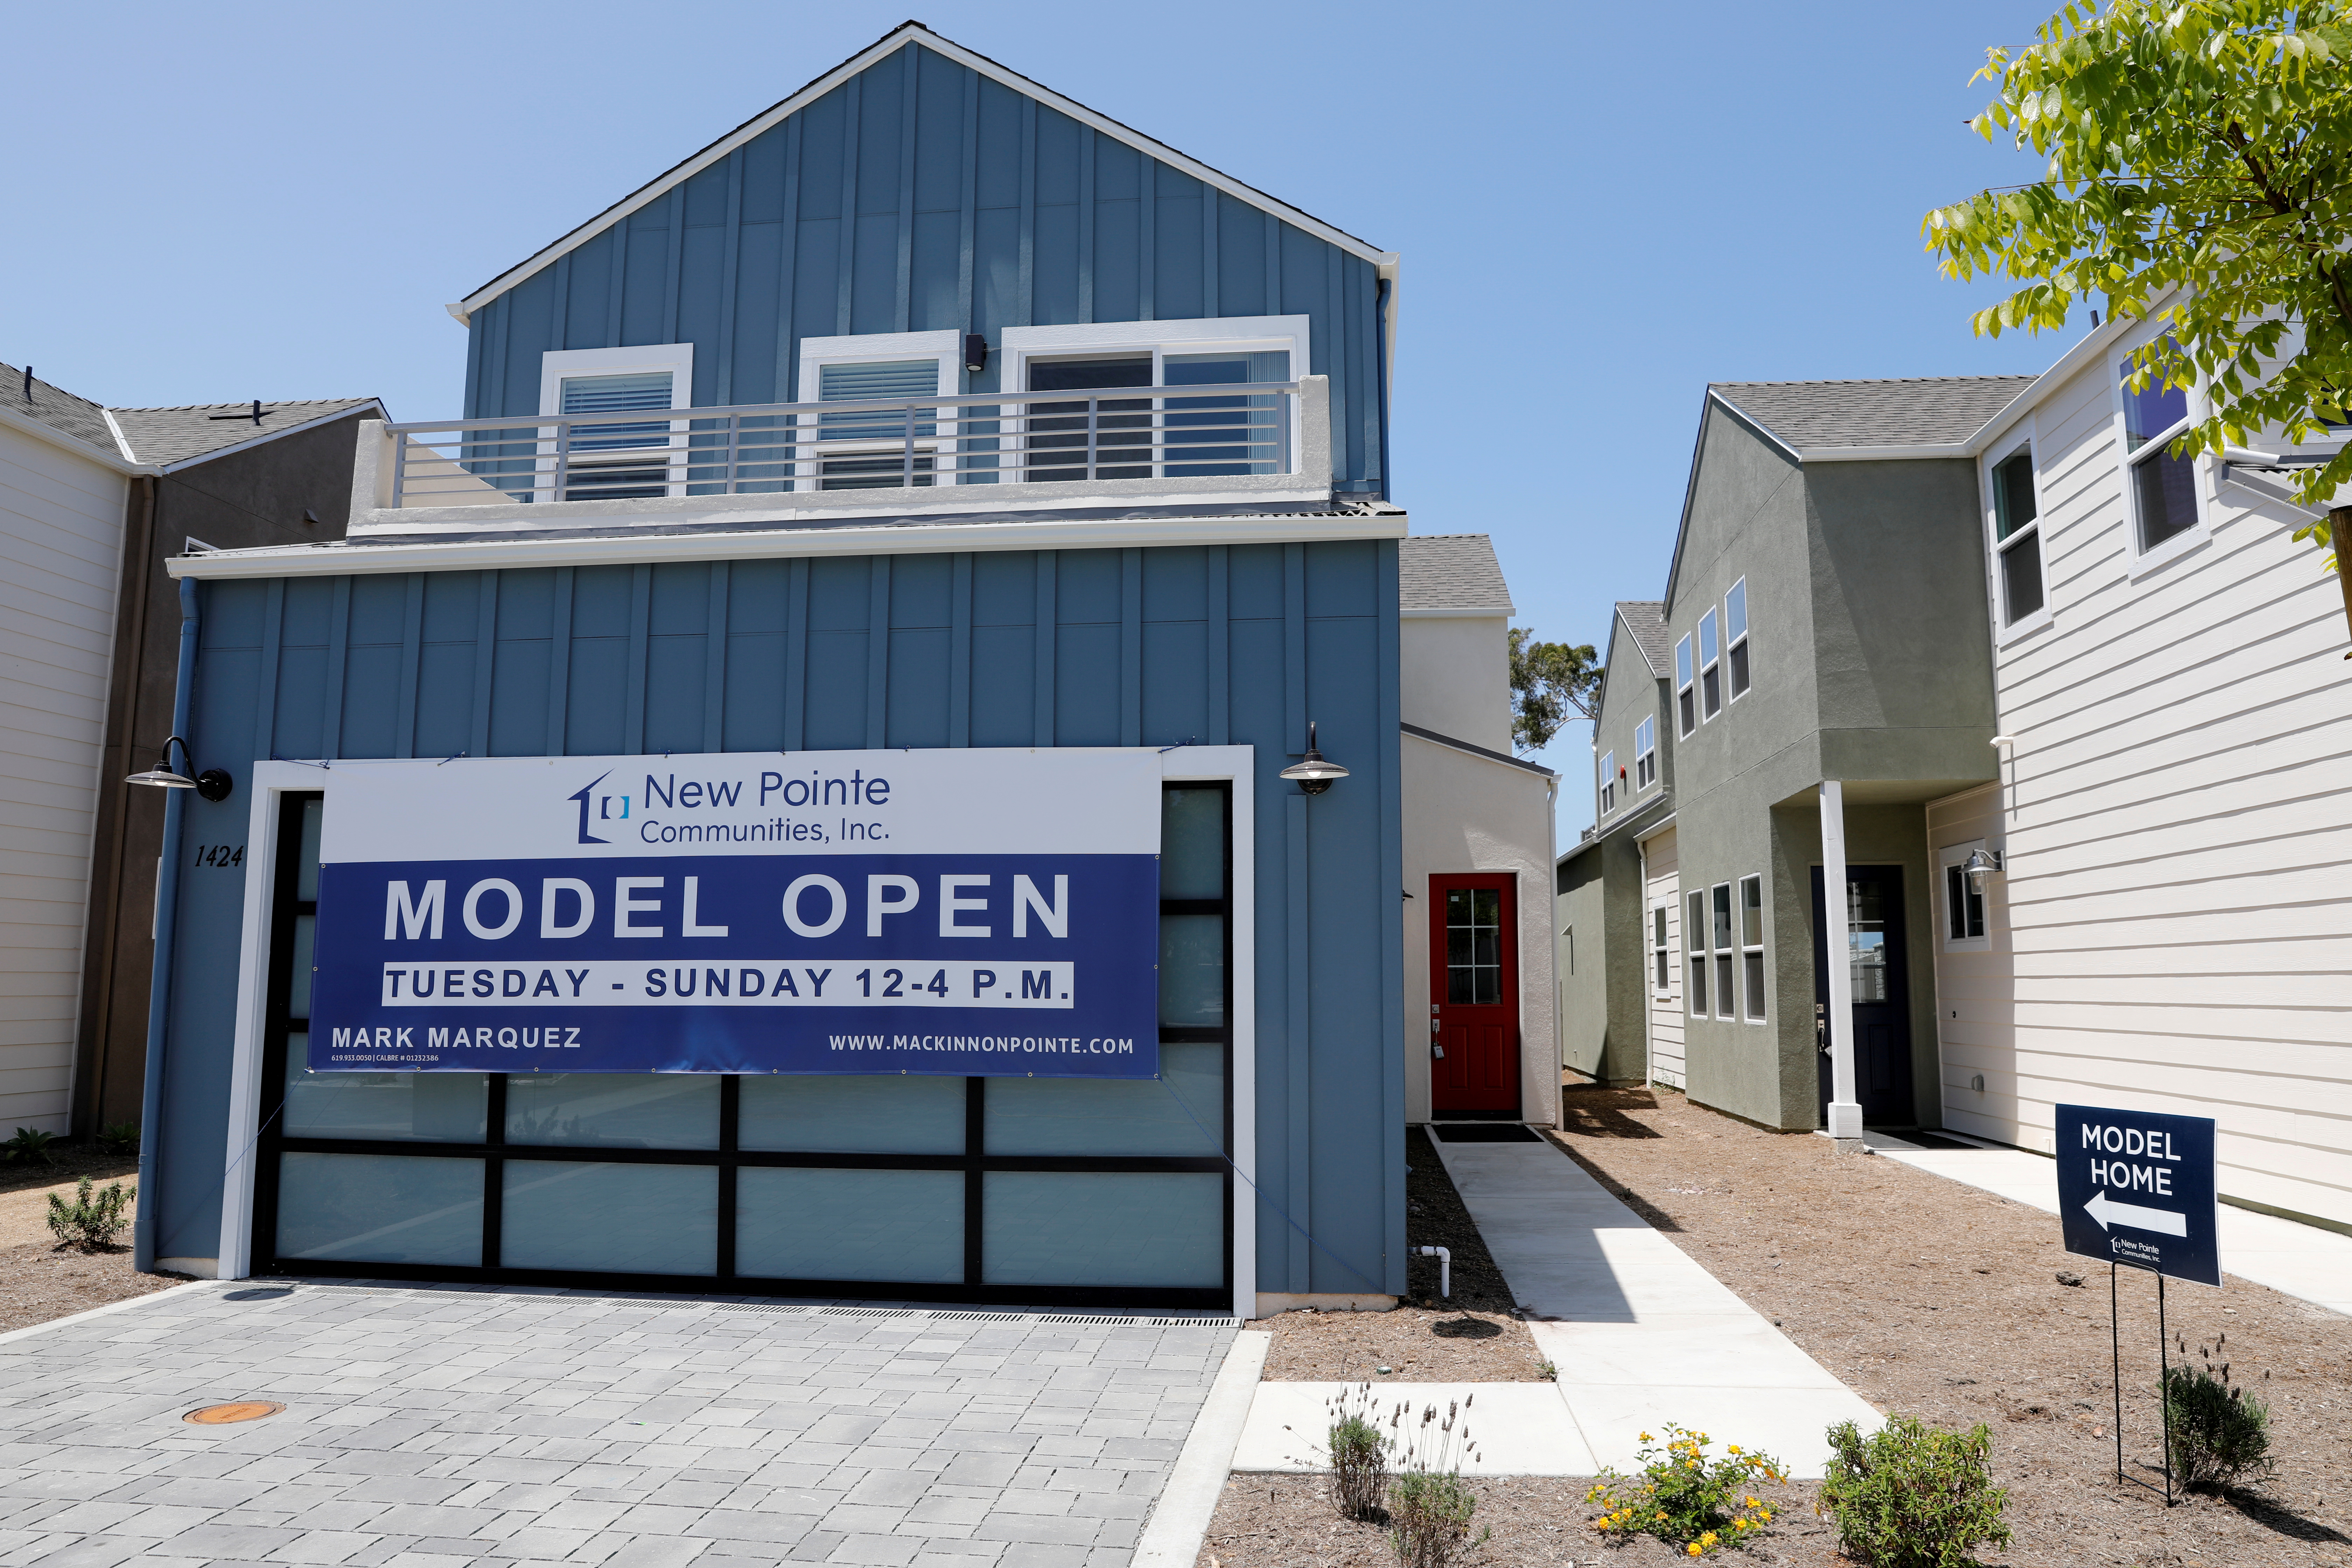 Newly constructed single family homes are shown for sale in Encinitas, California